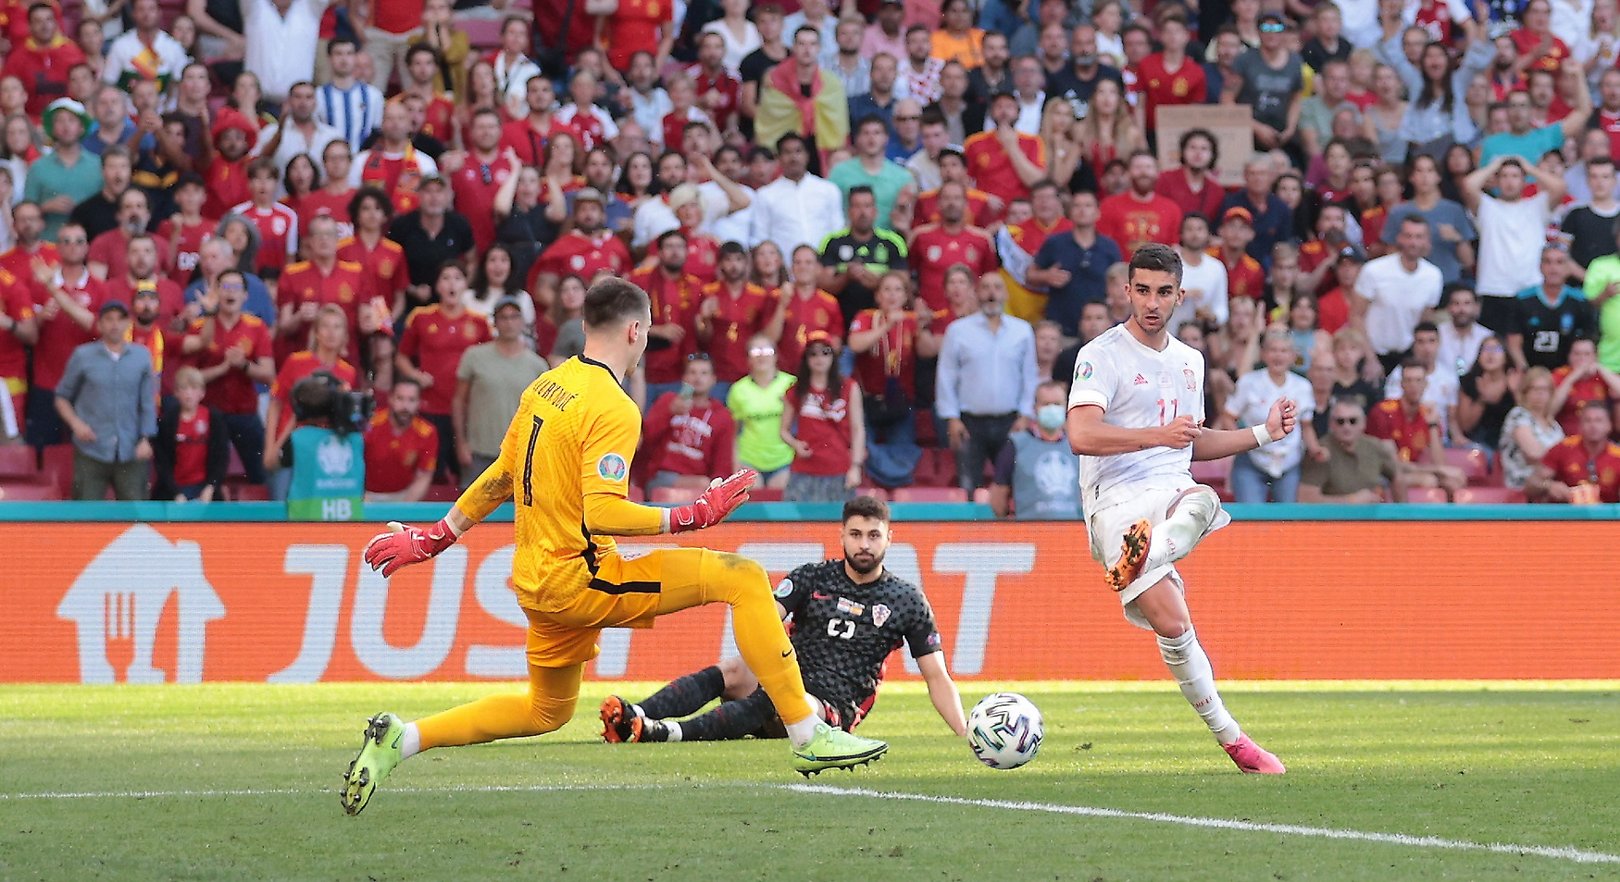 Torres shines again for Spain in eight-goal thriller